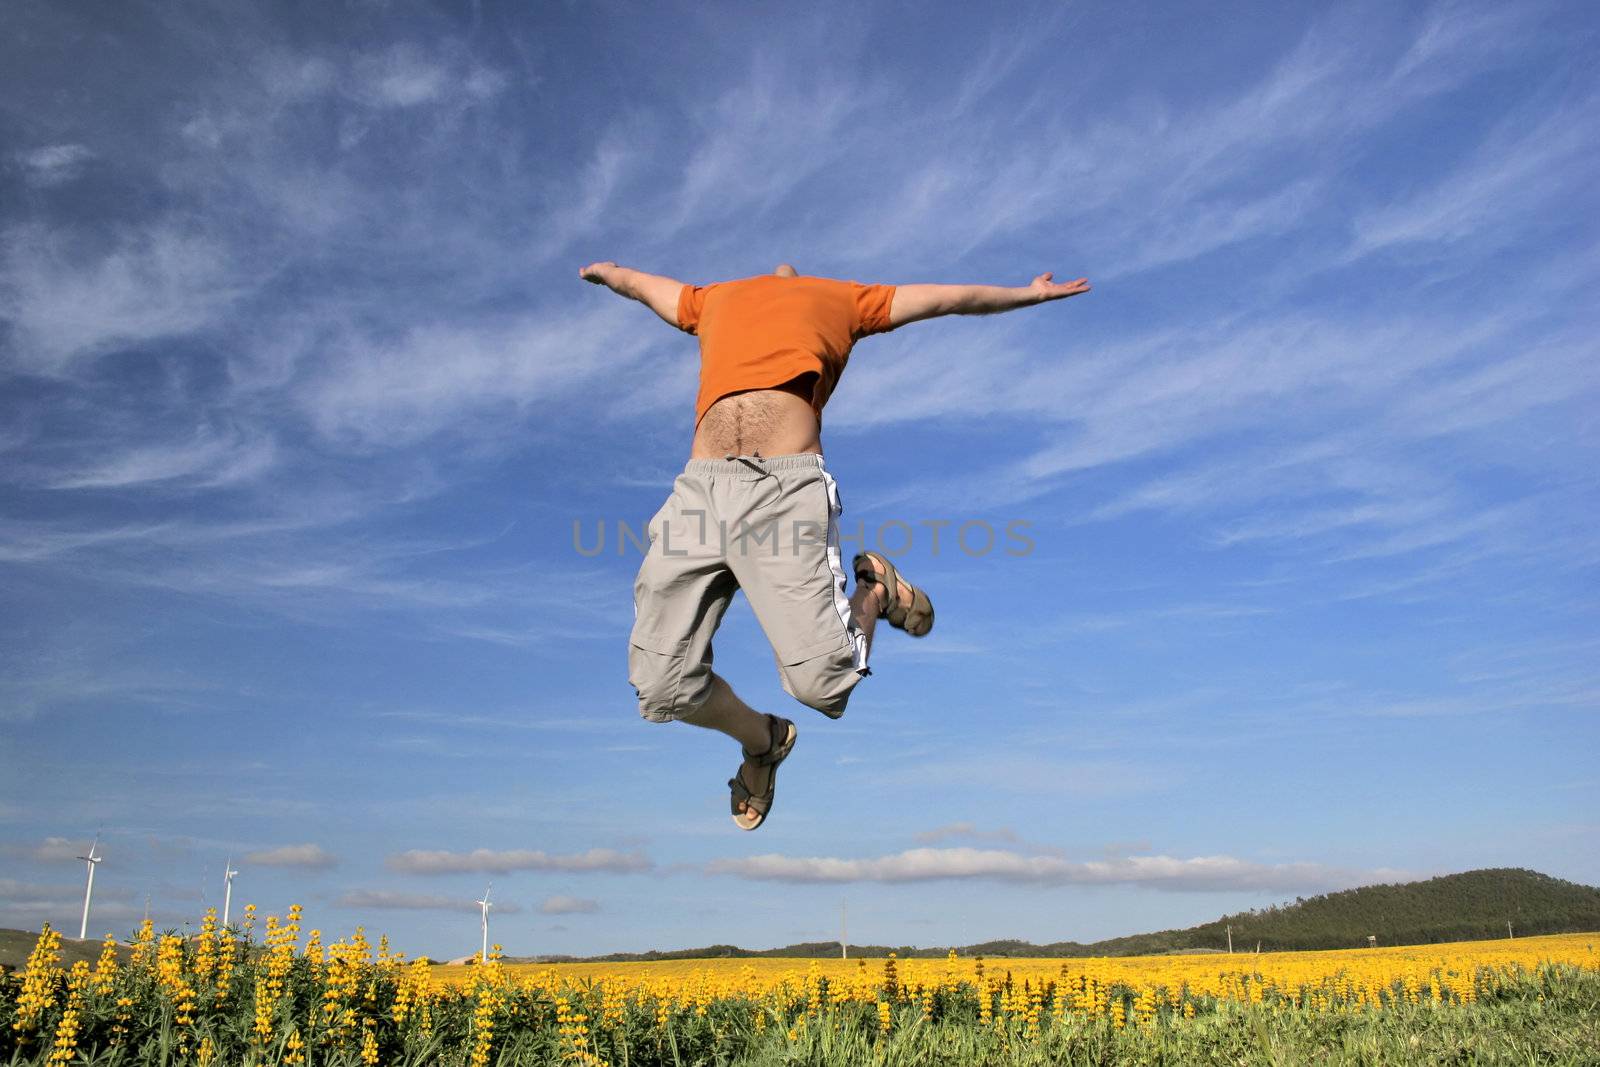 Jump to the sky over a flowery field